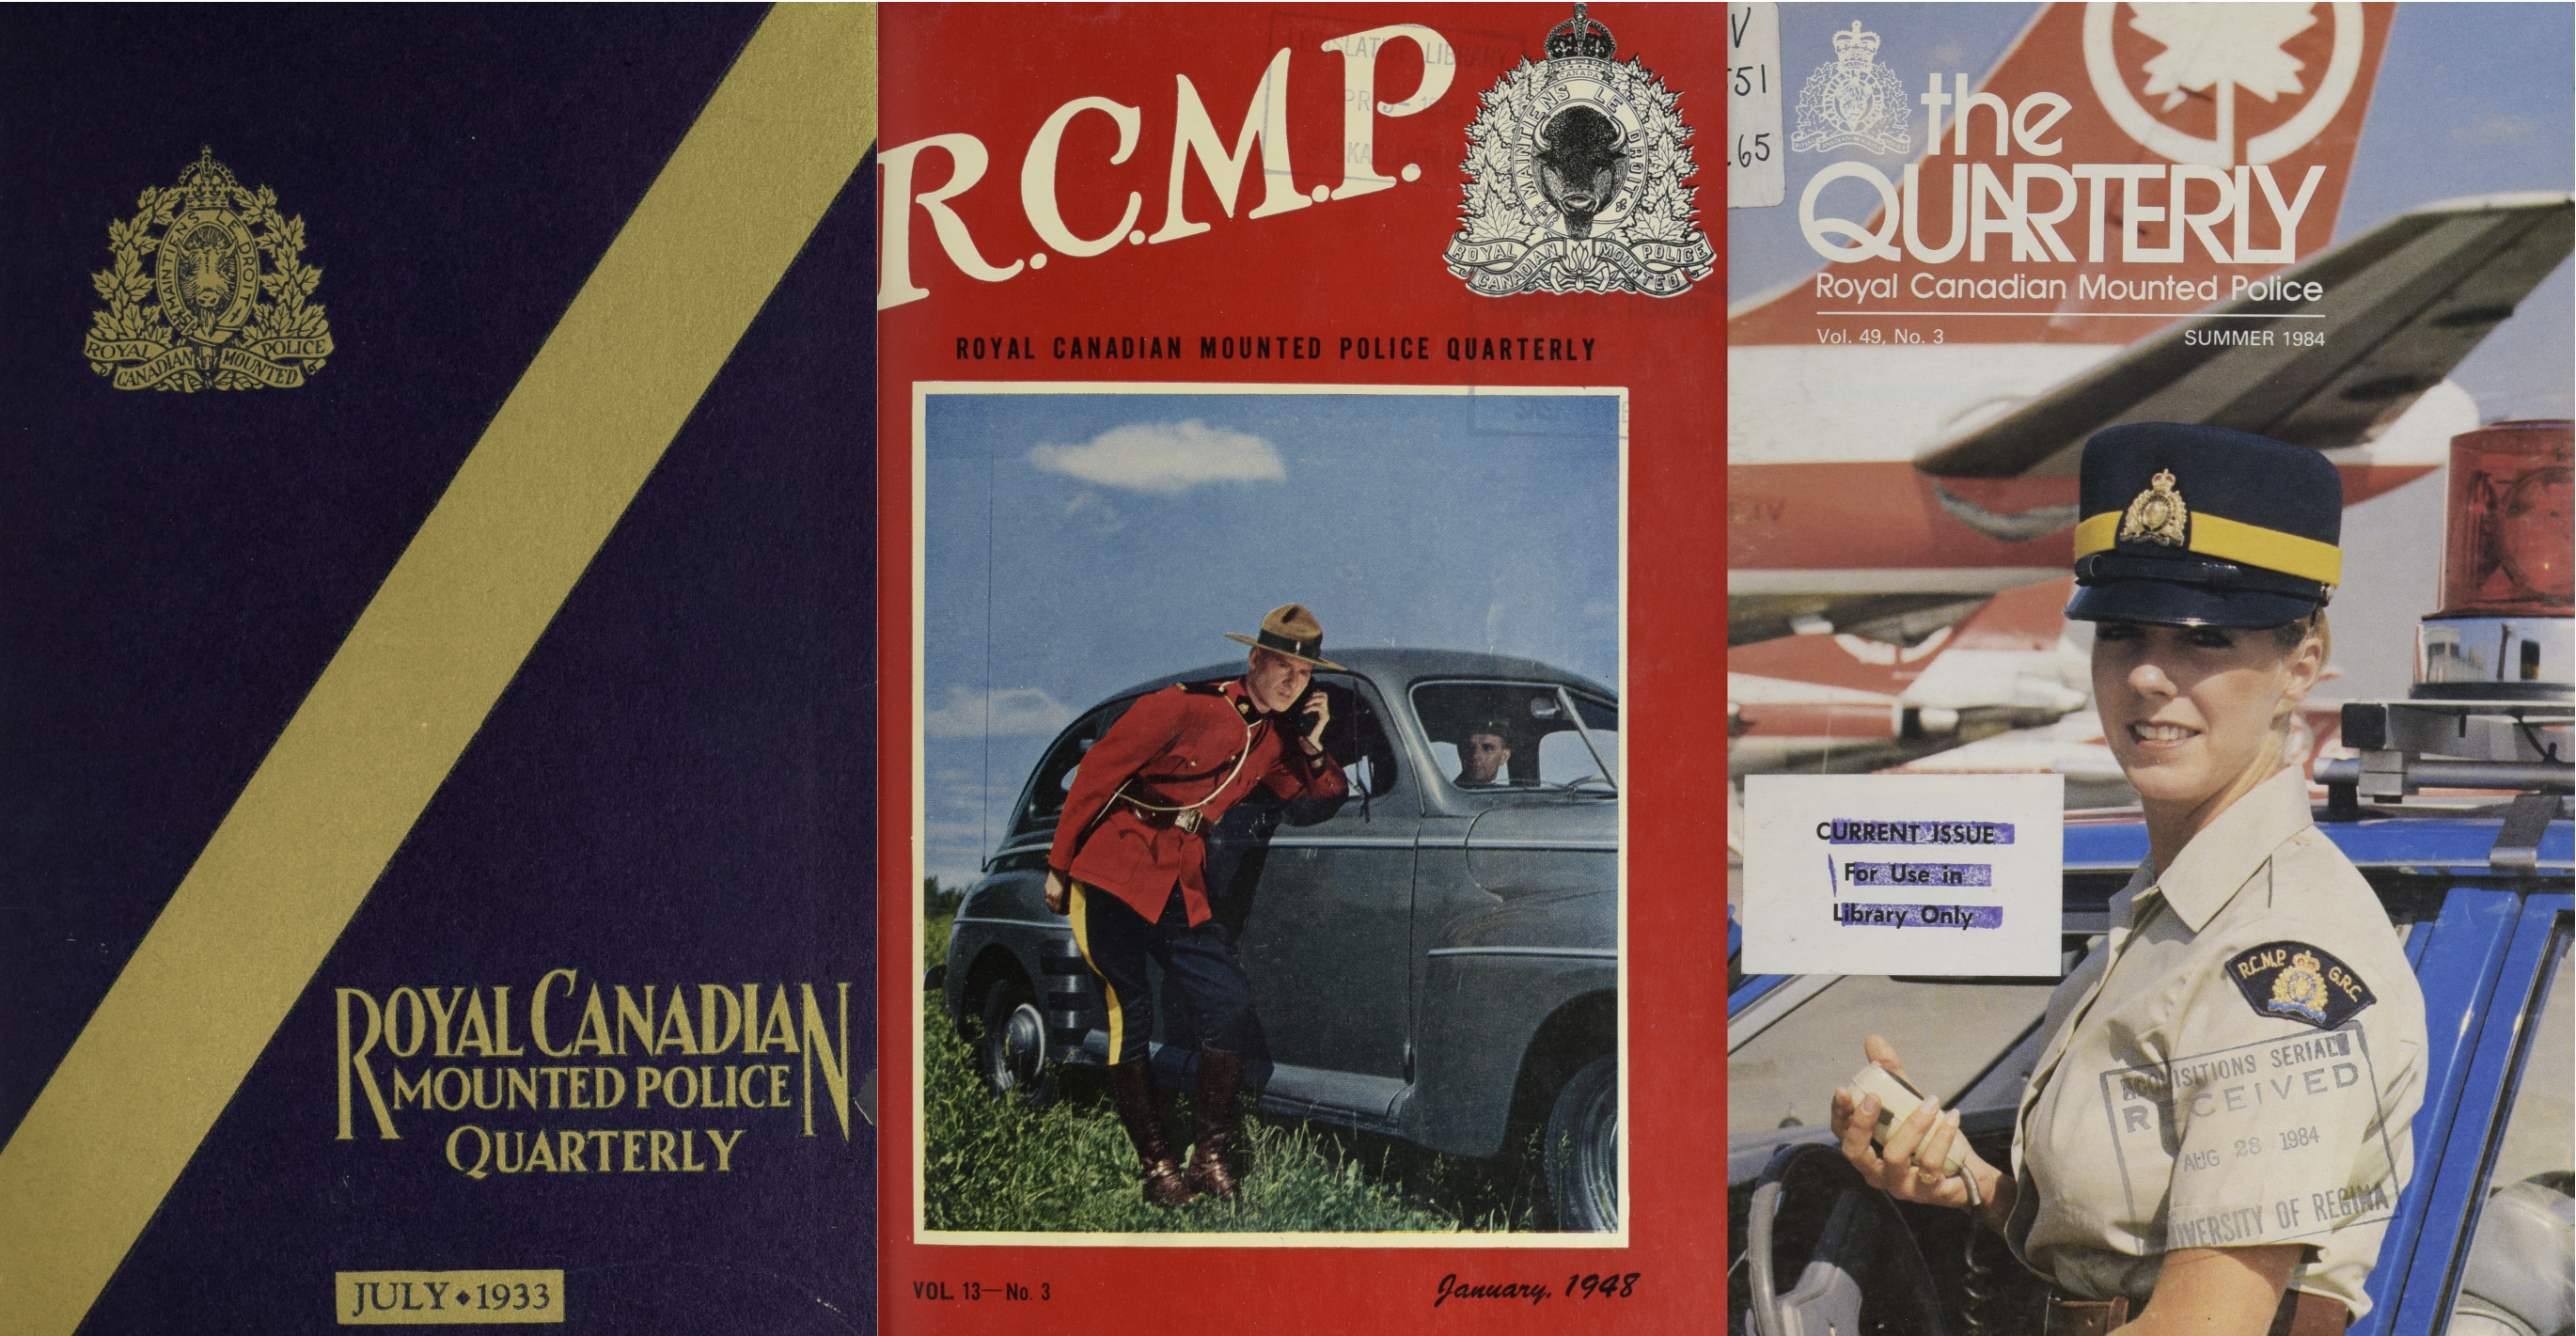 Three covers of RCMP Quarterly editions, including a blue and gold cover from 1933, a cover with a photograph of an officer using a car radio system from 1948, and a cover with a photo of a female officer from 1984.